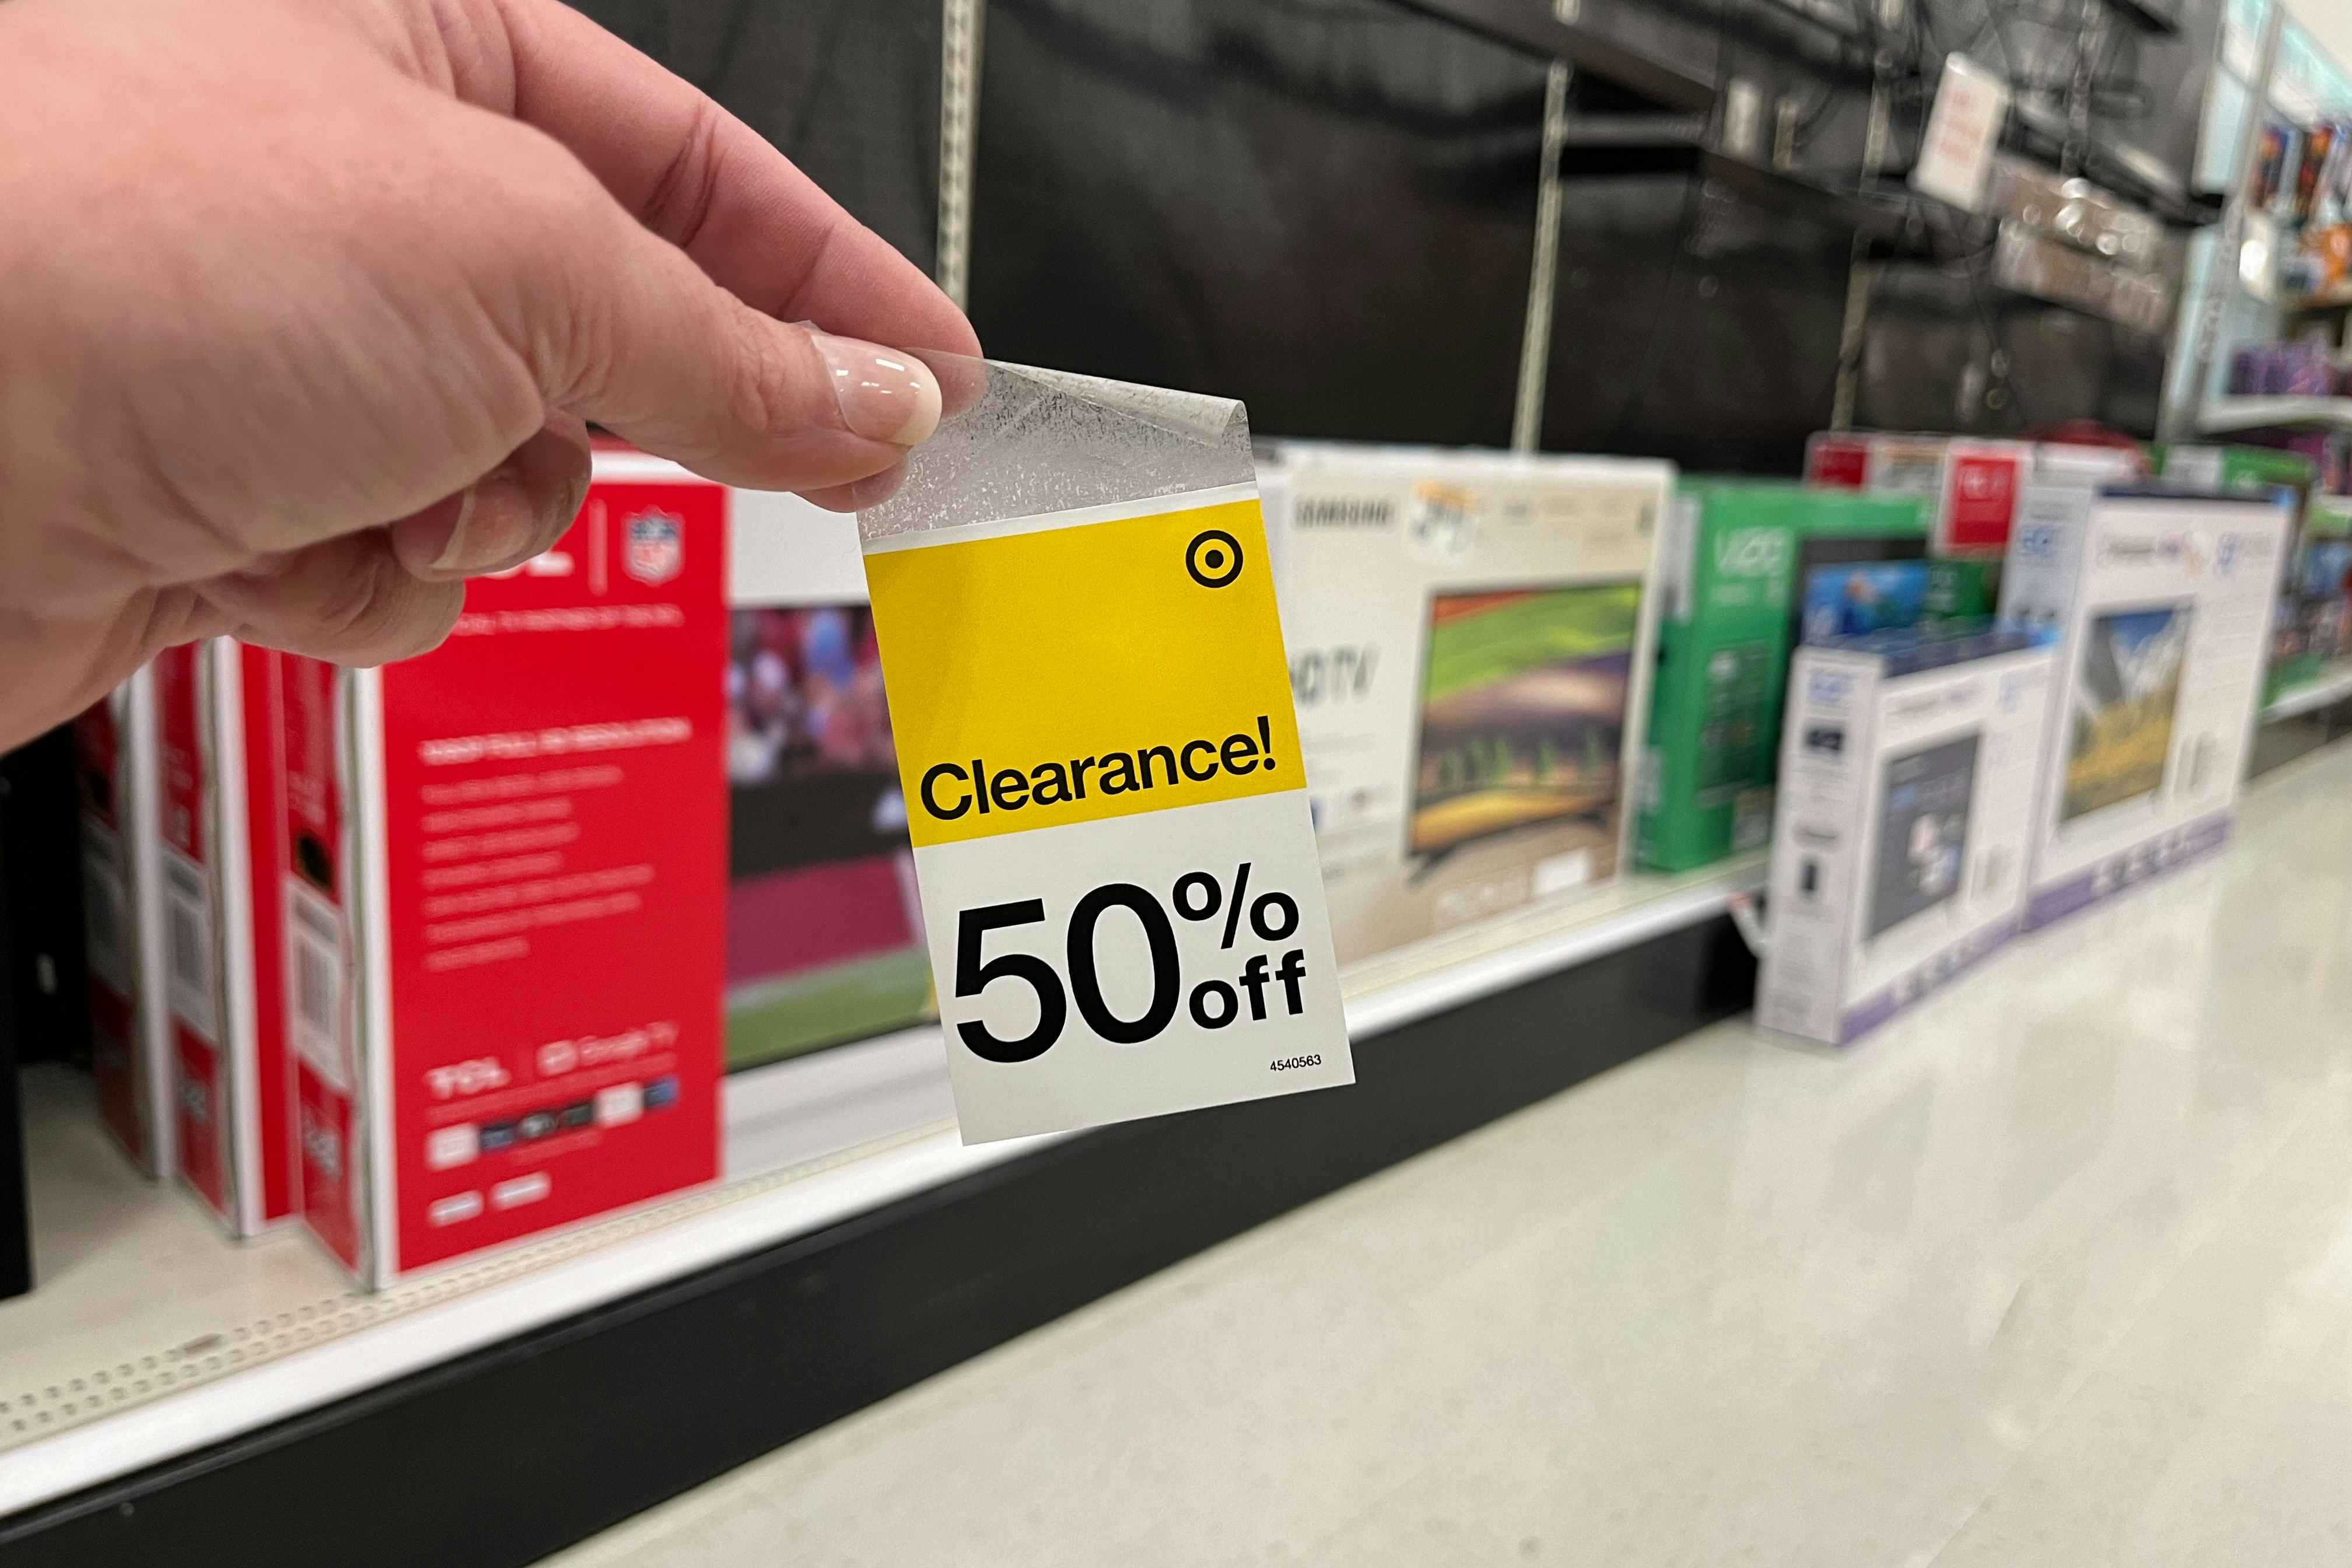 LG and Samsung TV Clearance, 50% Off at Target — $166 LG 50-Inch TV